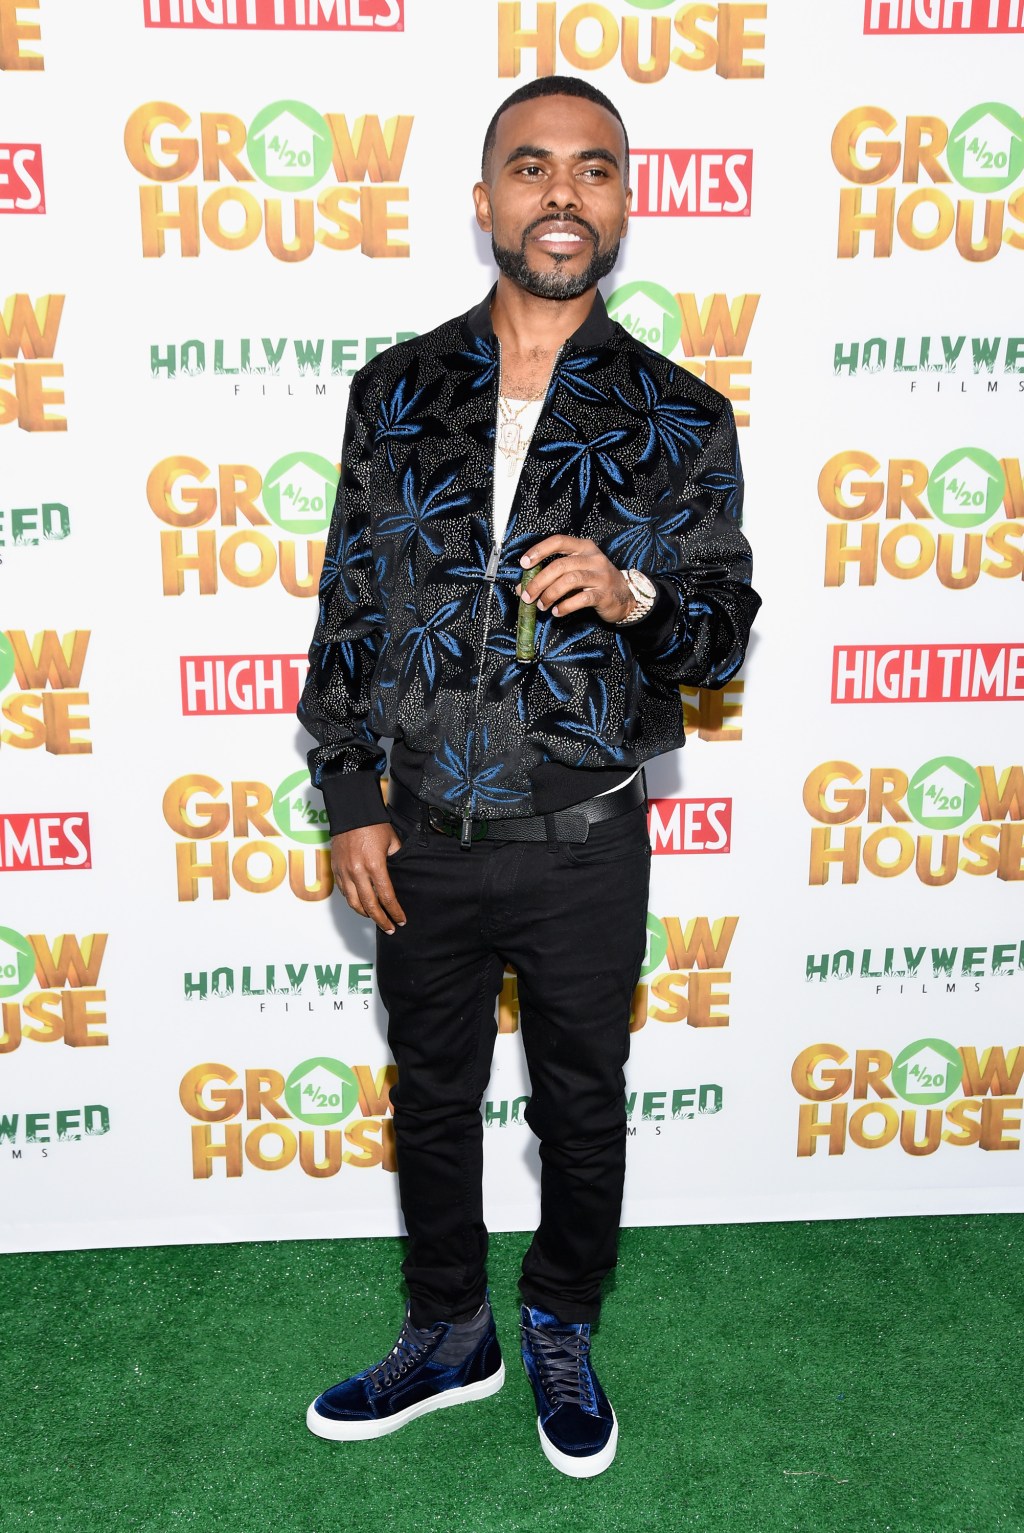 Premiere Of 'Grow House' - Arrivals